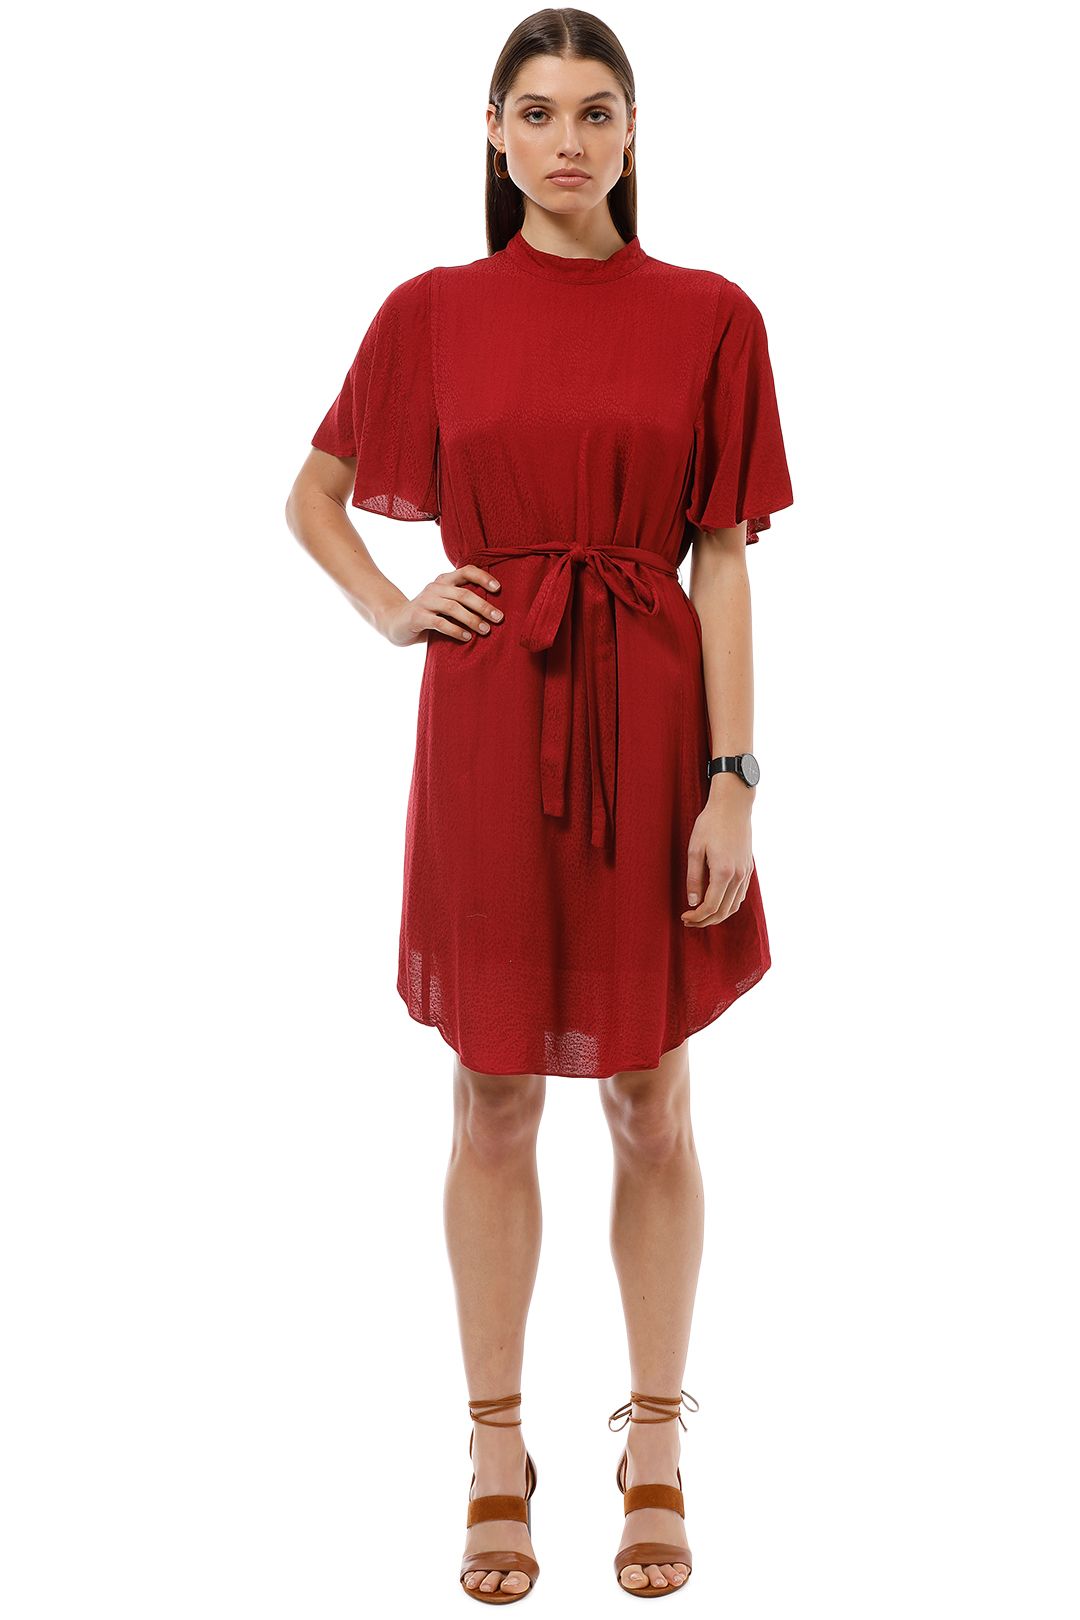 Saba - Meadow Dress - Red - Front